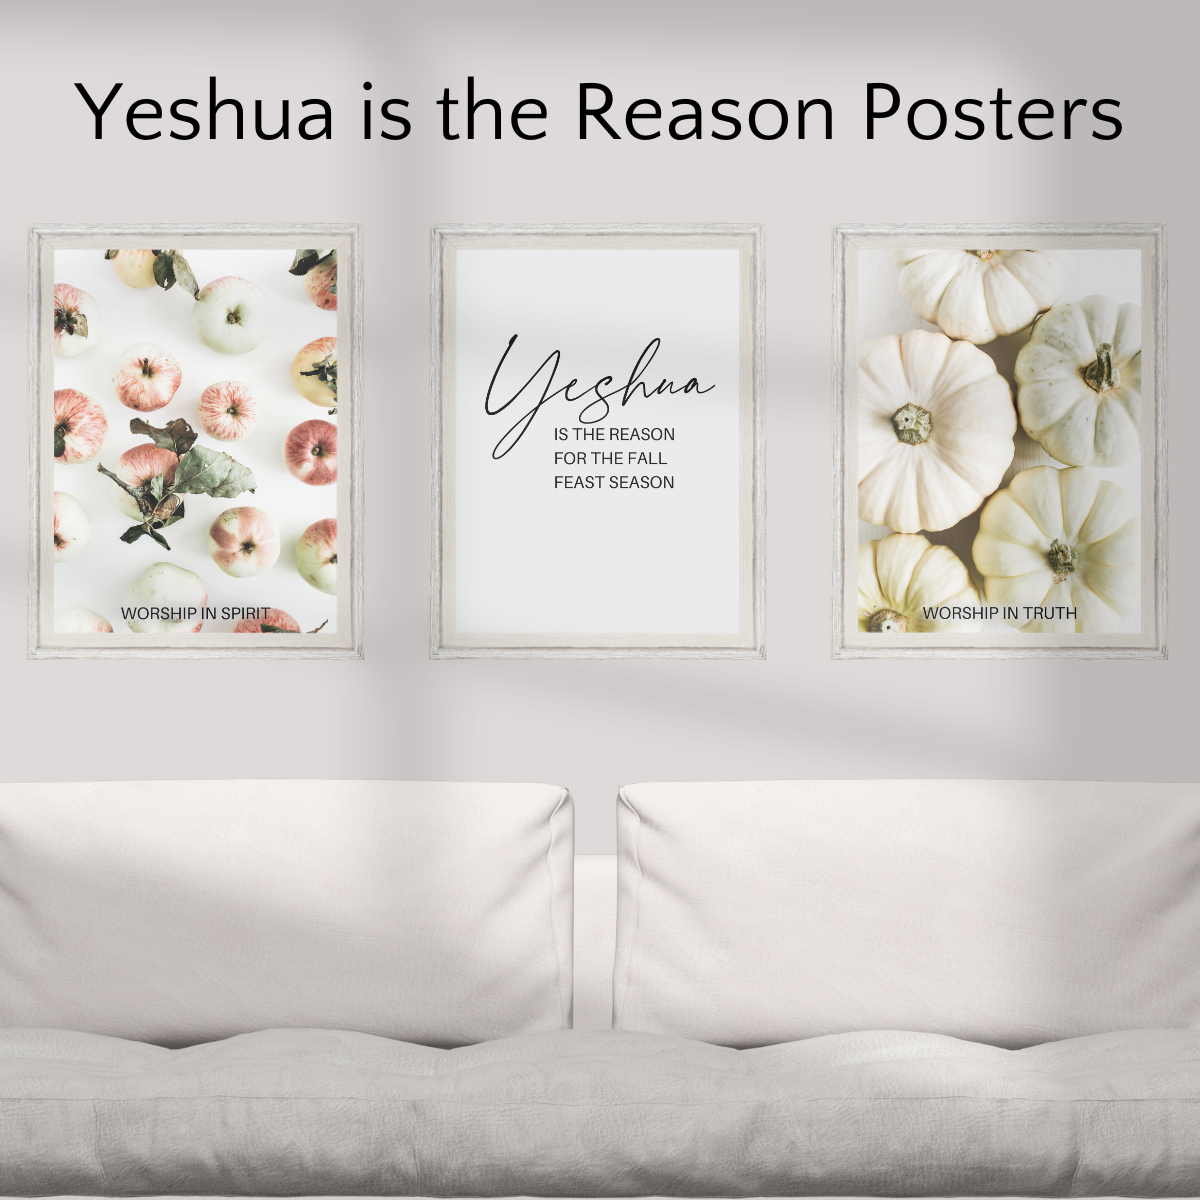 2023 Yeshua is the Reason Posters